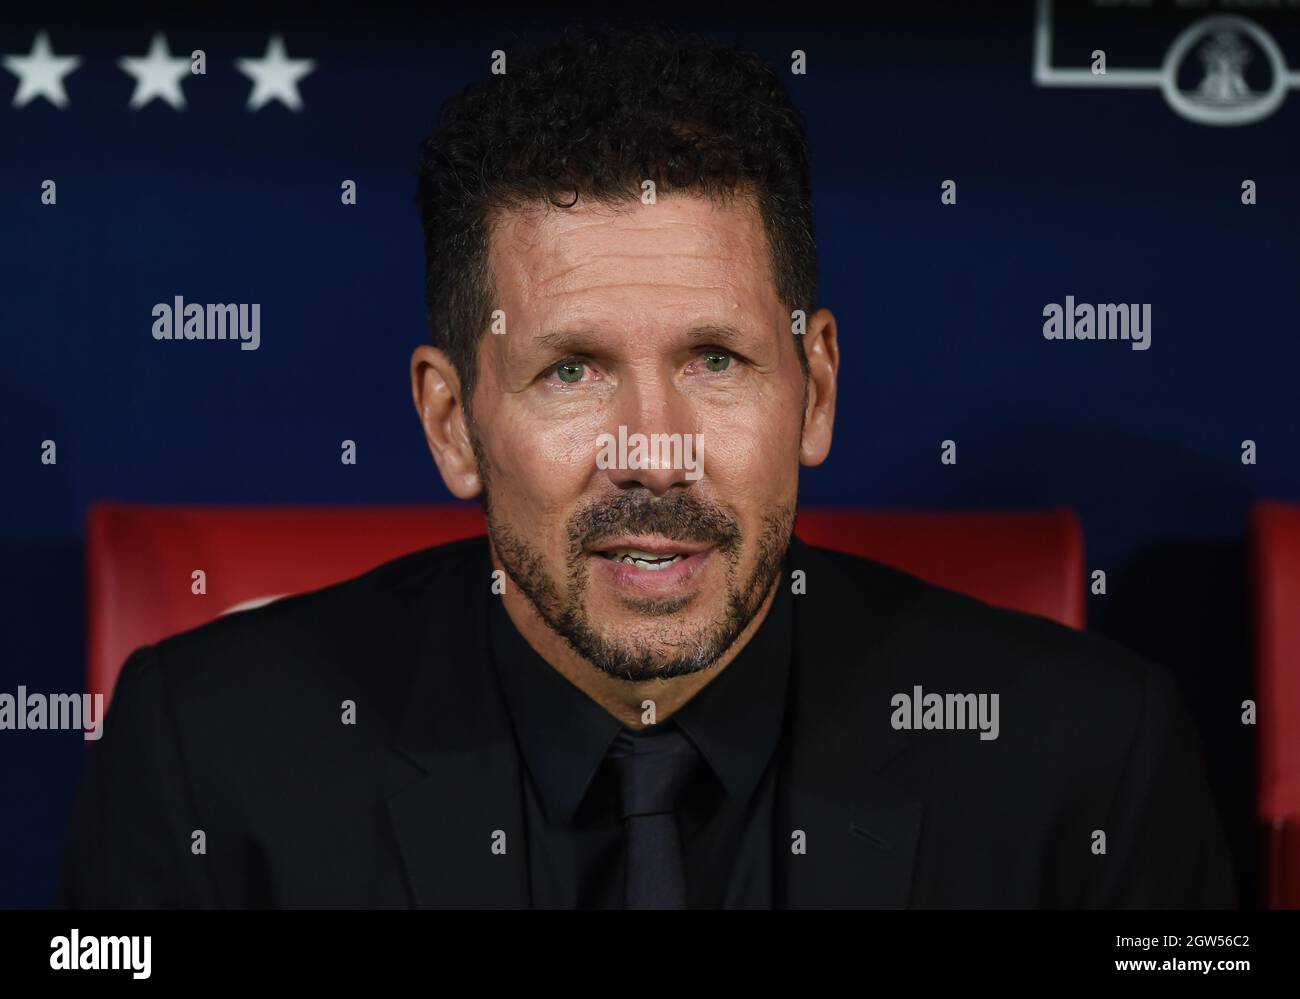 Madrid, Spain. 2nd Oct, 2021. Atletico de Madrid's coach Diego Simeone reacts before a Spanish first division league football match between Atletico de Madrid and FC Barcelona in Madrid, Spain, on Oct. 2, 2021. Credit: Gustavo Valiente/Xinhua/Alamy Live News Stock Photo